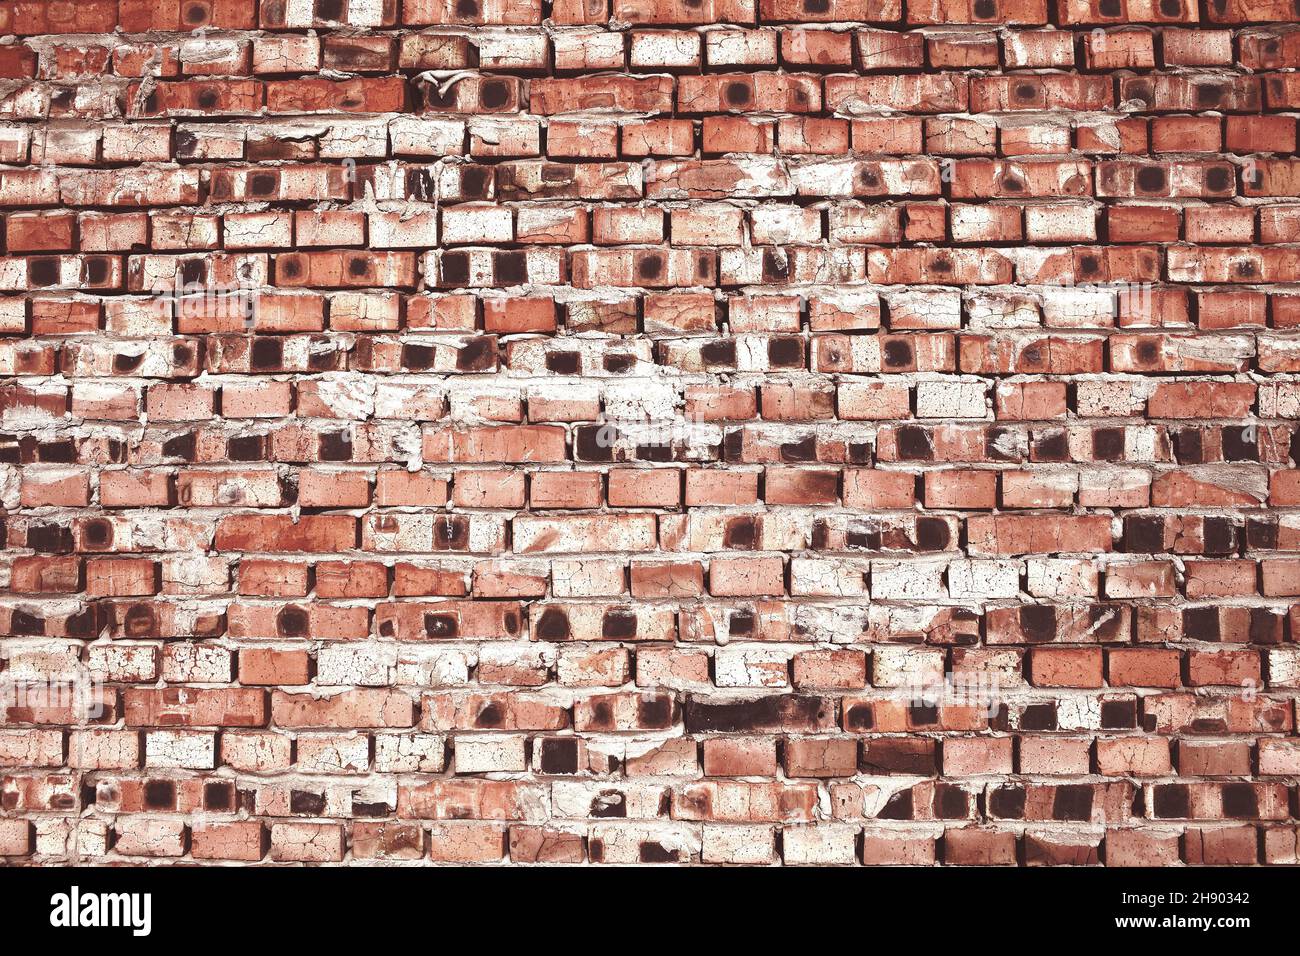 Brickwall lined with used brick, textured background with empty space for your designing. Stock Photo